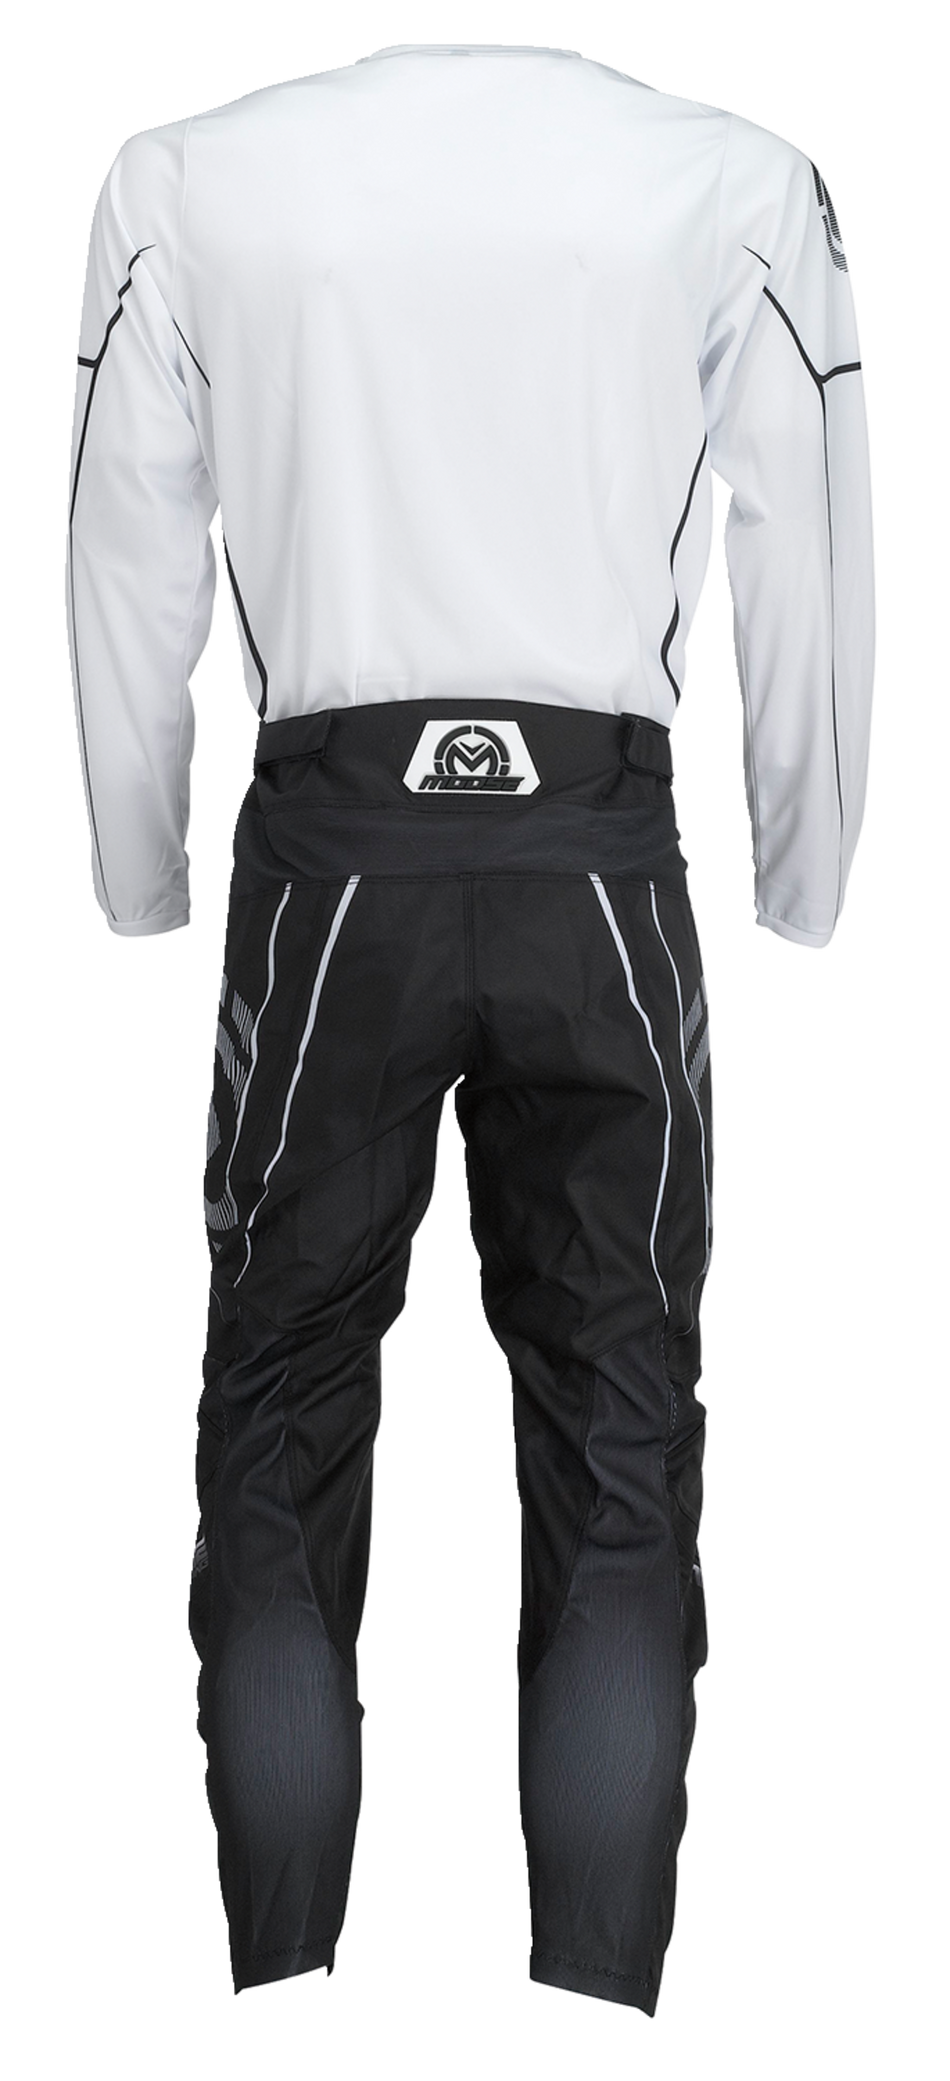 MOOSE RACING Qualifier® Jersey - Black/White - Small 2910-7188